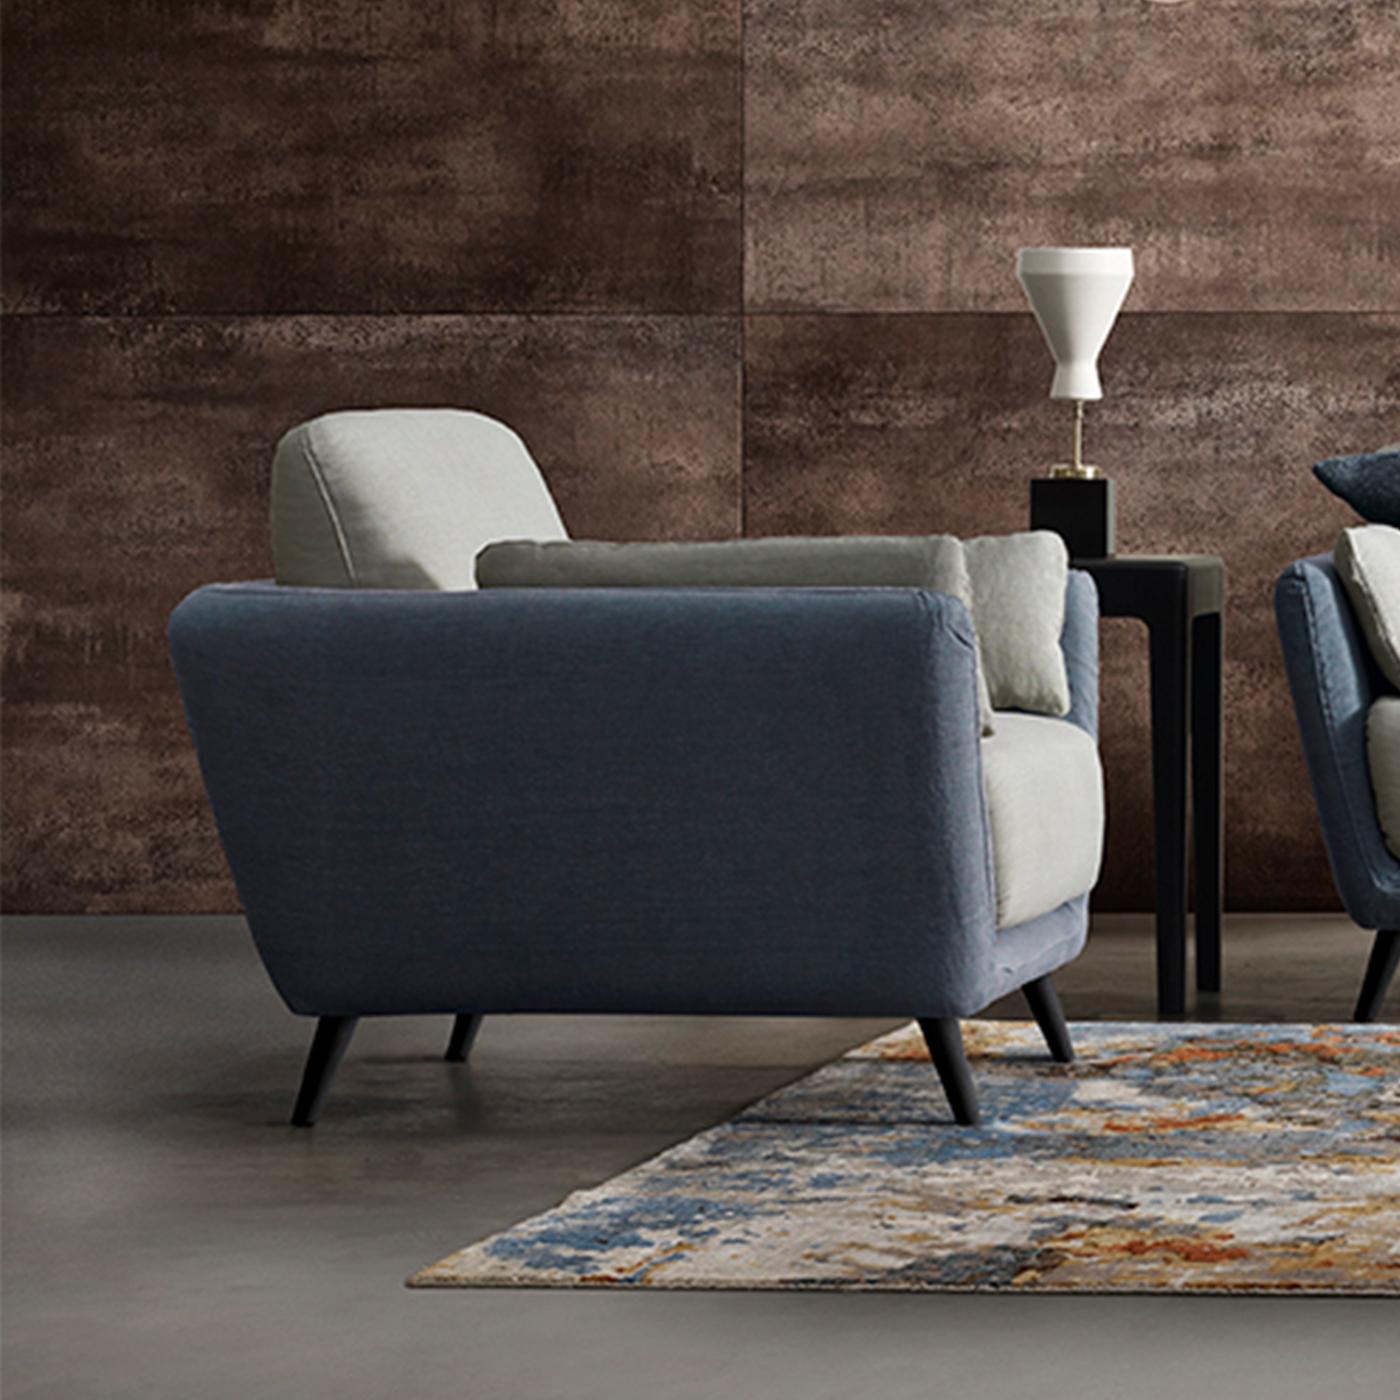 A charming contemporary take on classic furnishings, the Domino Armchair is completely personalizable to suit your tastes. Shown here with linen upholstery in Jeans and Celestino with walnut legs in Modo10's Havana finish, the chair is also easy to